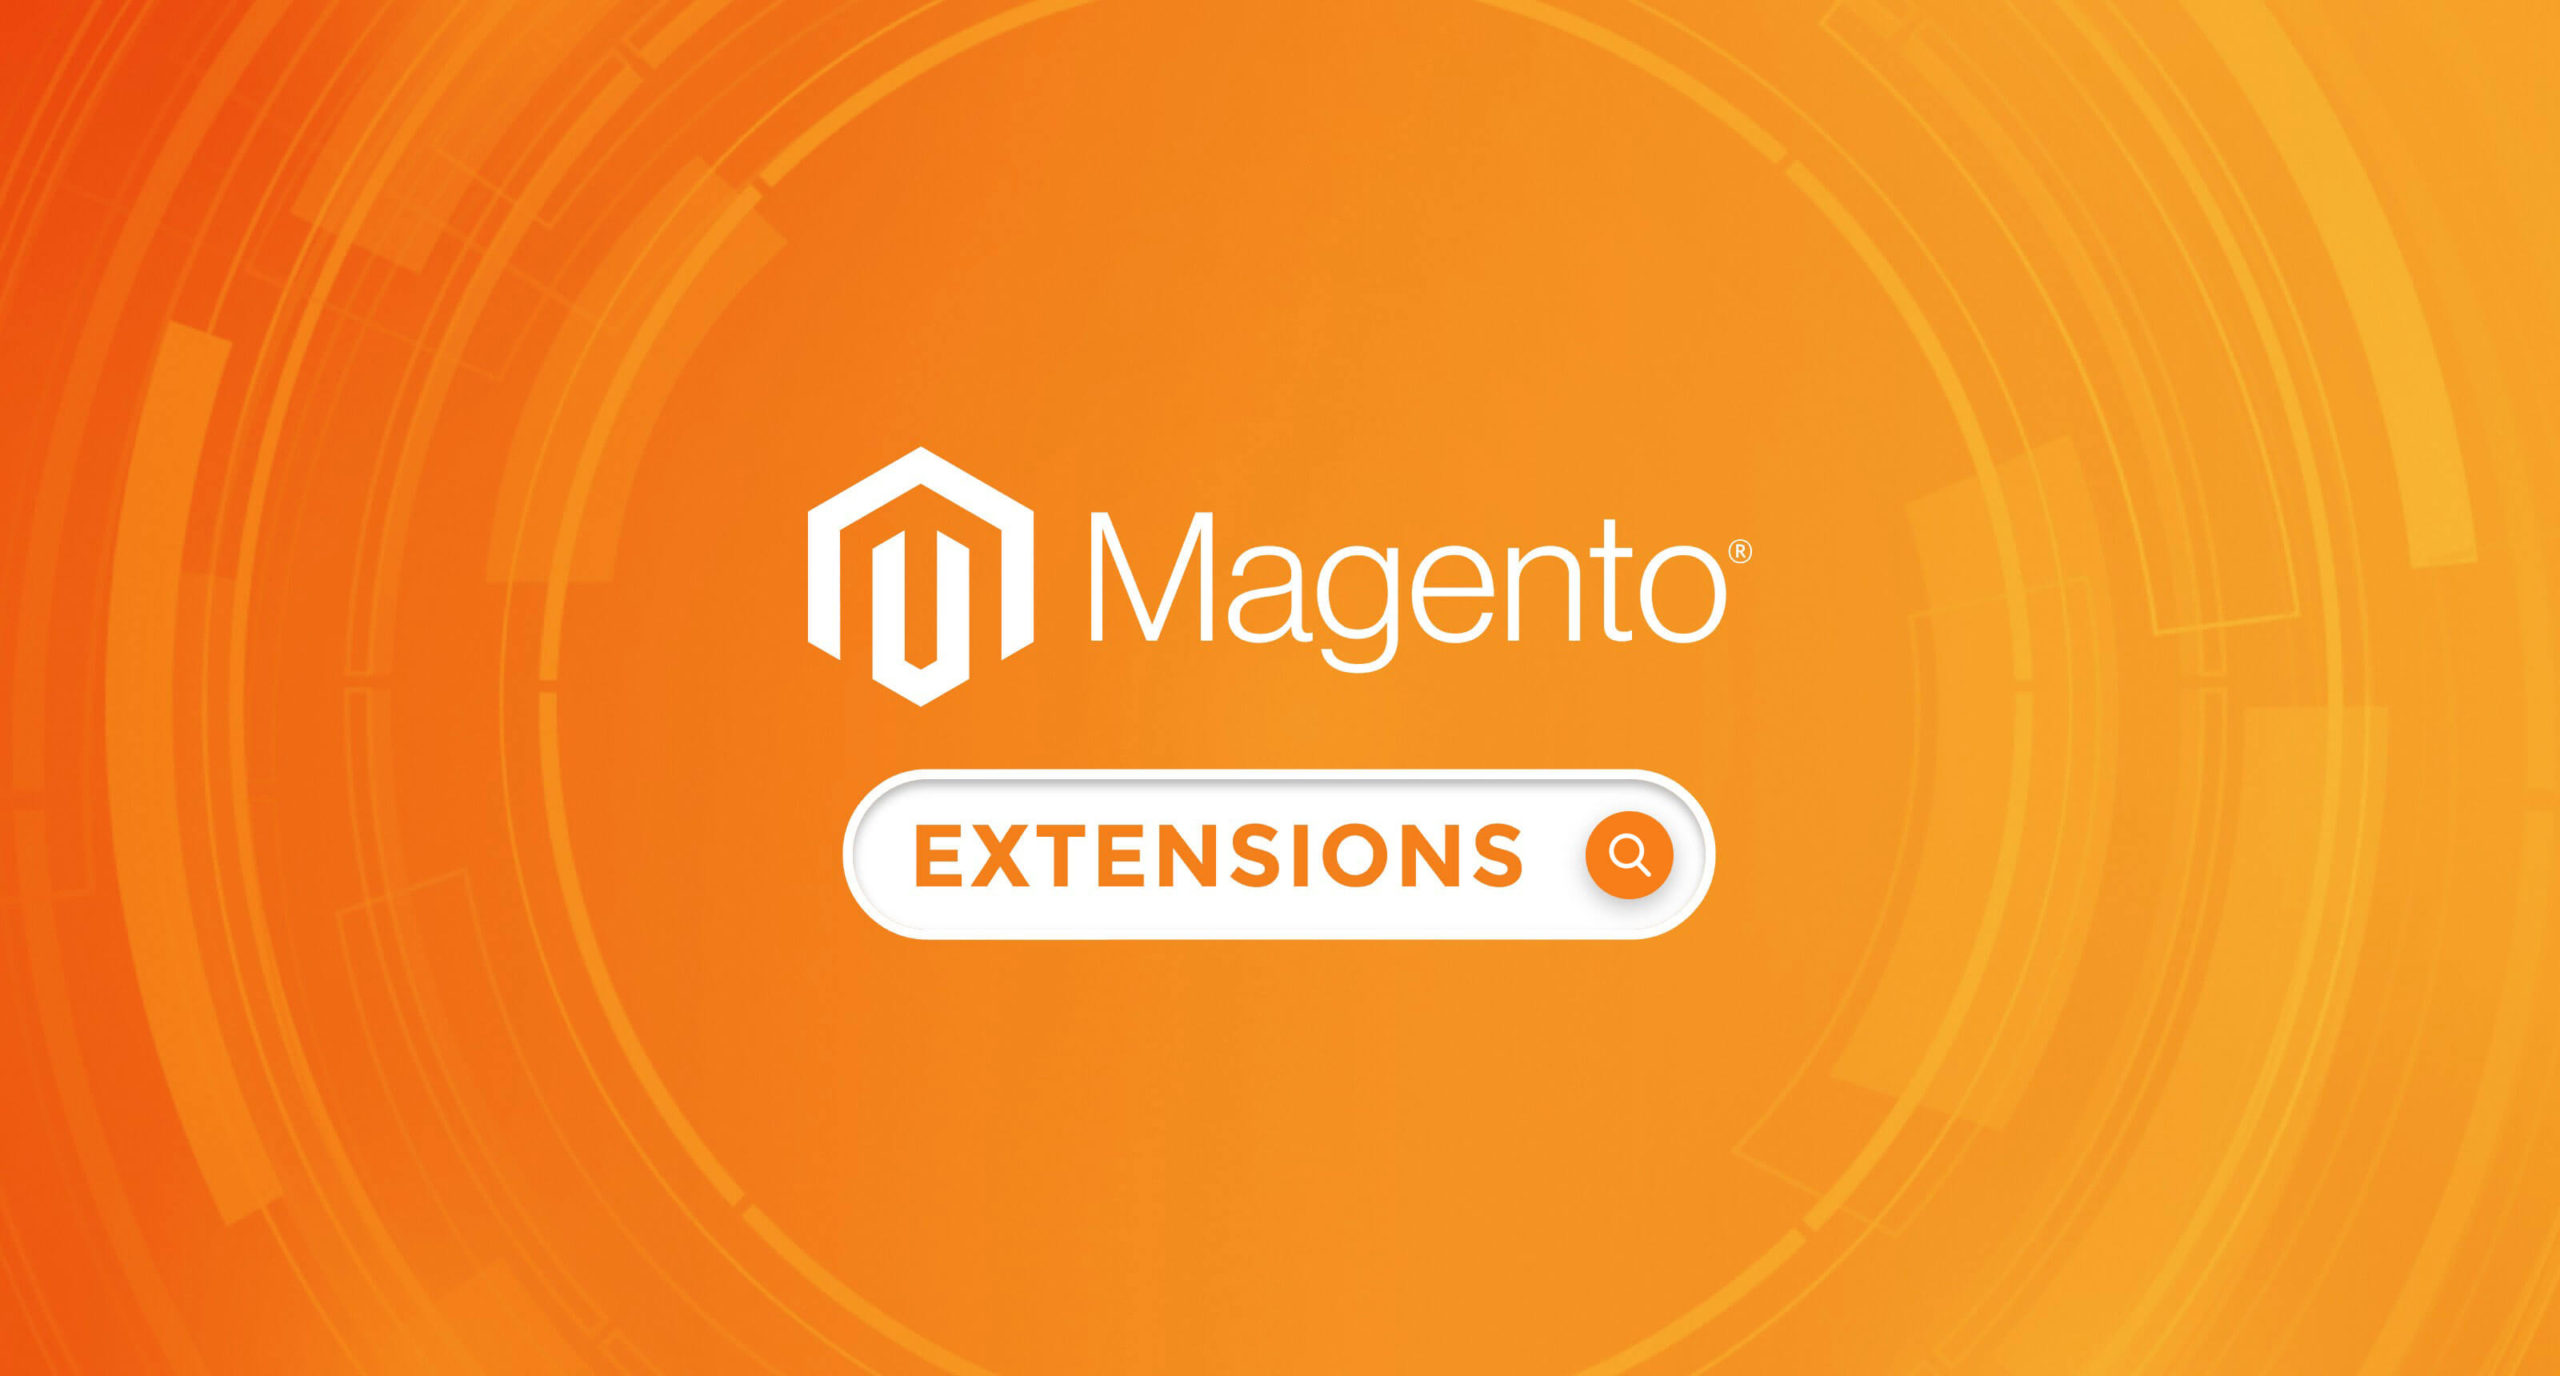 What to Look for in a Magento Extension